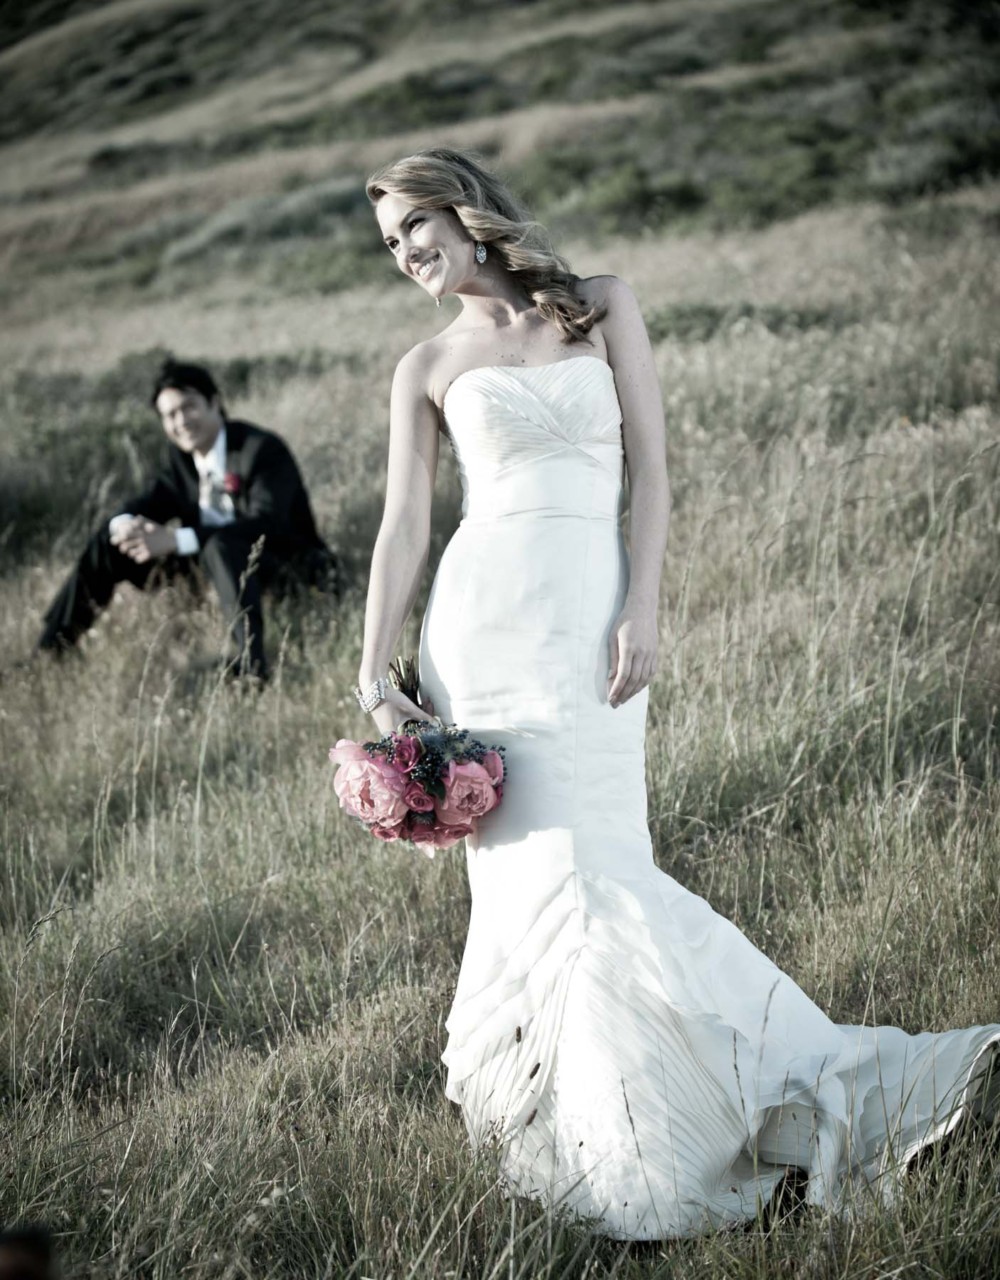 Looking for a spring wedding photographer in Alyeska?